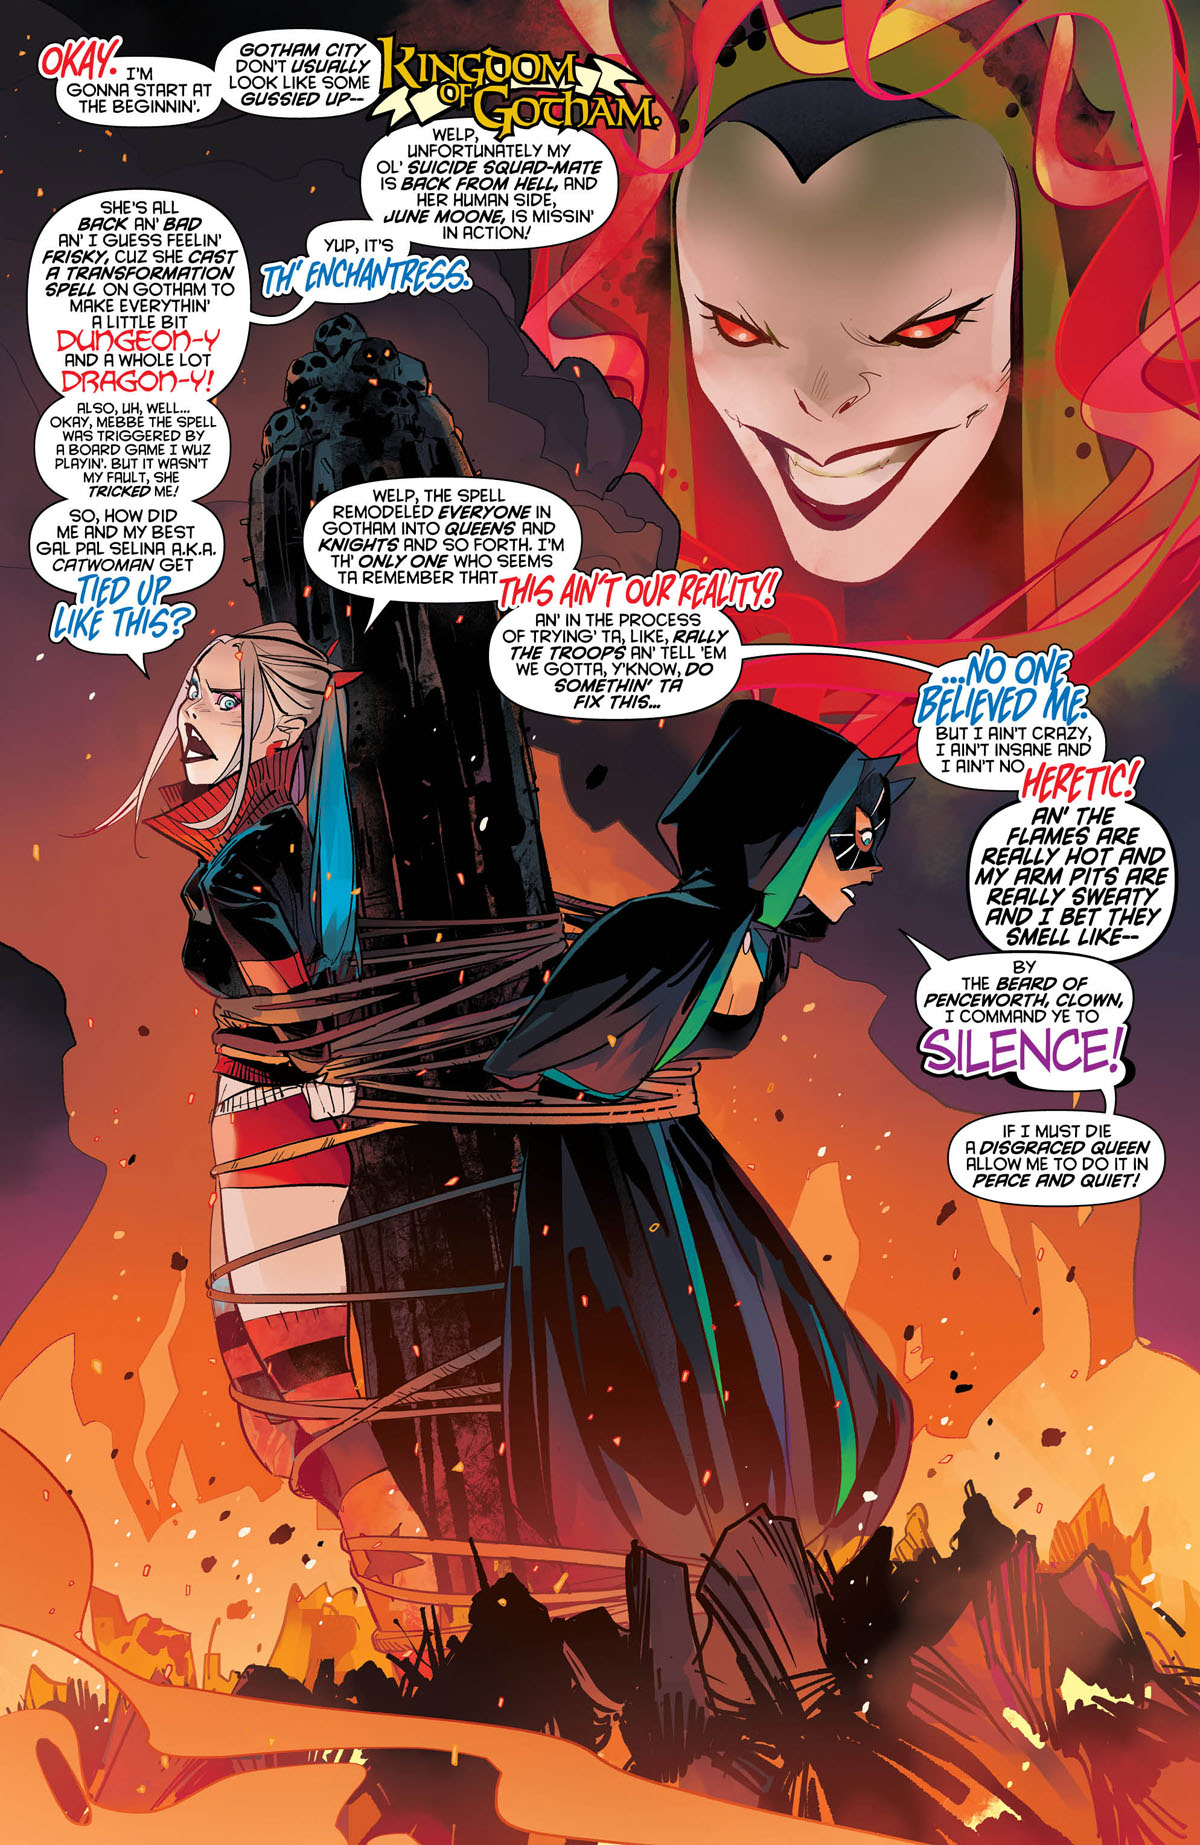 Harley Quinn #62 page 1